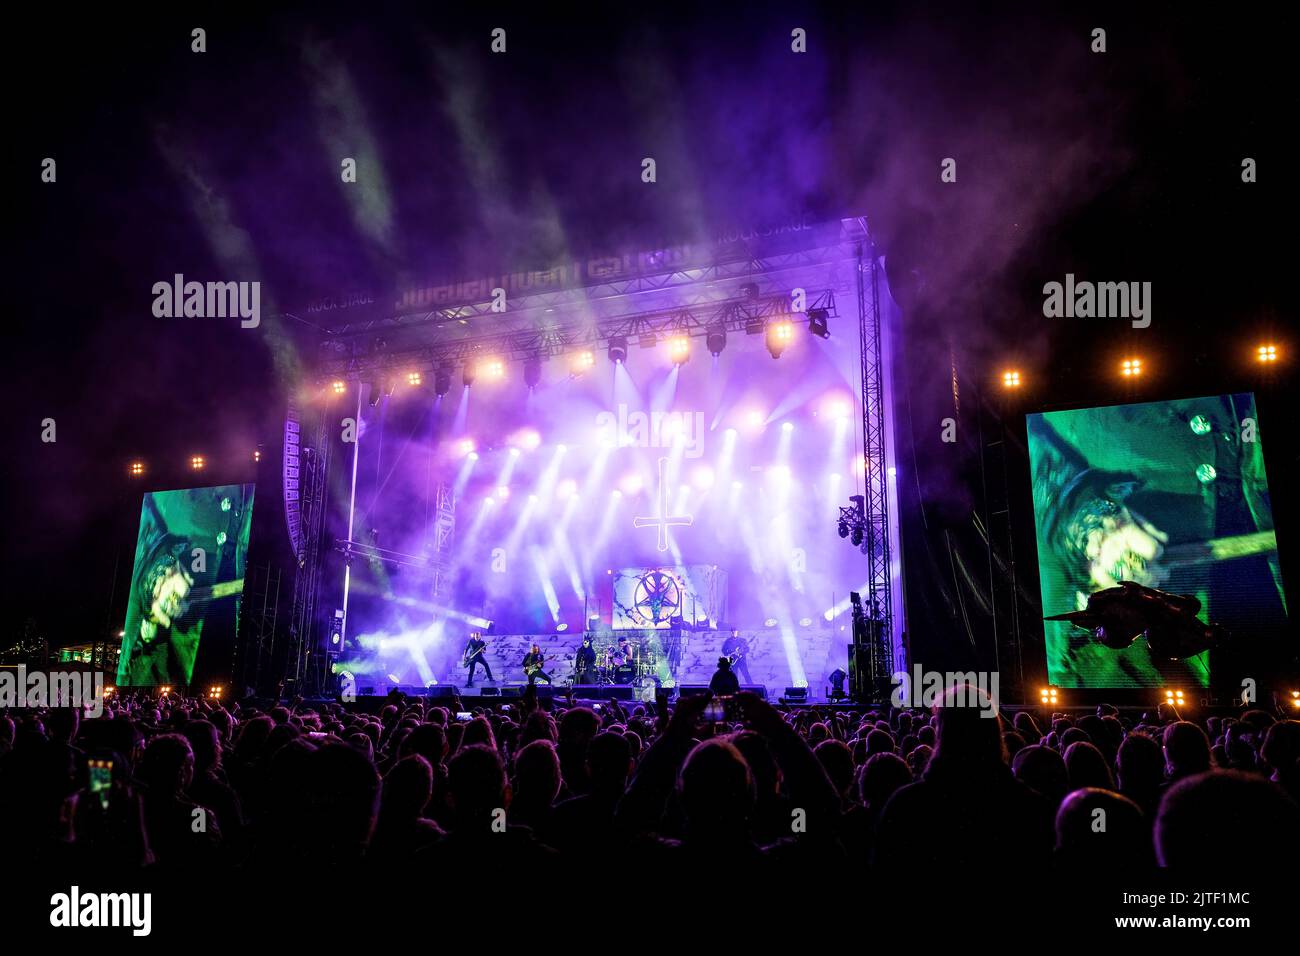 Solvesborg, Sweden. 10th, June 2022.The Danish heavy metal band Mercyful Fate performs a live concert during the Swedish music festival Sweden Rock Festival 2022 in Solvesborg. (Photo credit: Gonzales Photo - Terje Dokken). Stock Photo